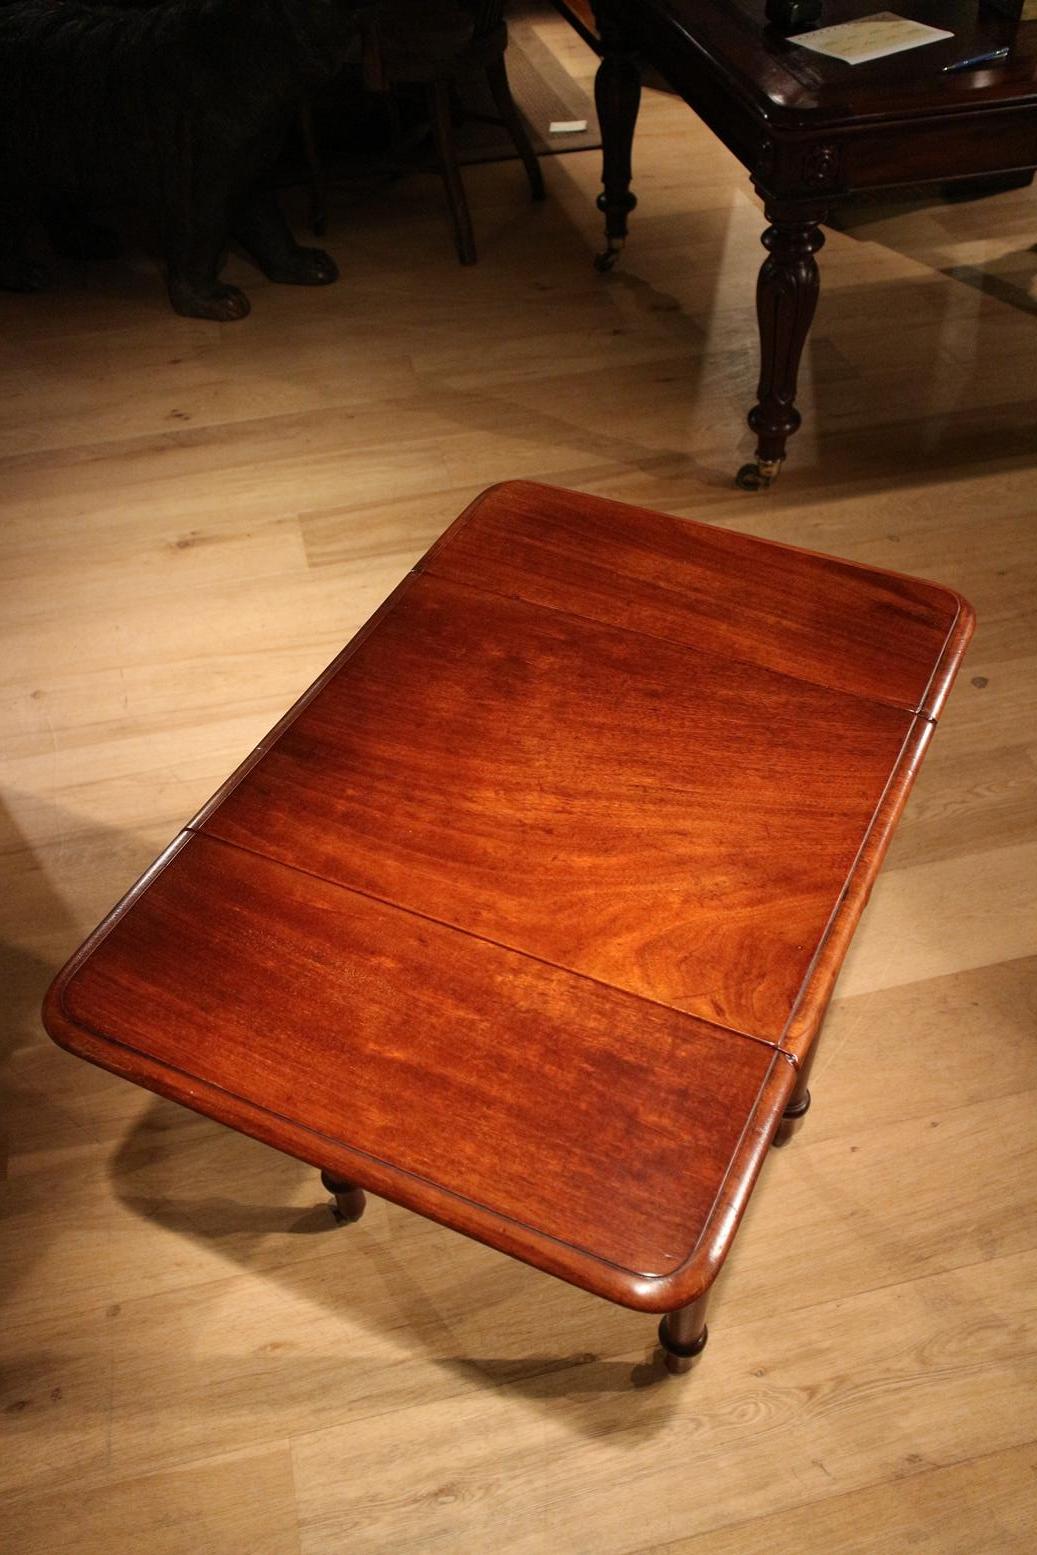 British 19th Century Little Mahogany Pembroke Table with 2 Drawers